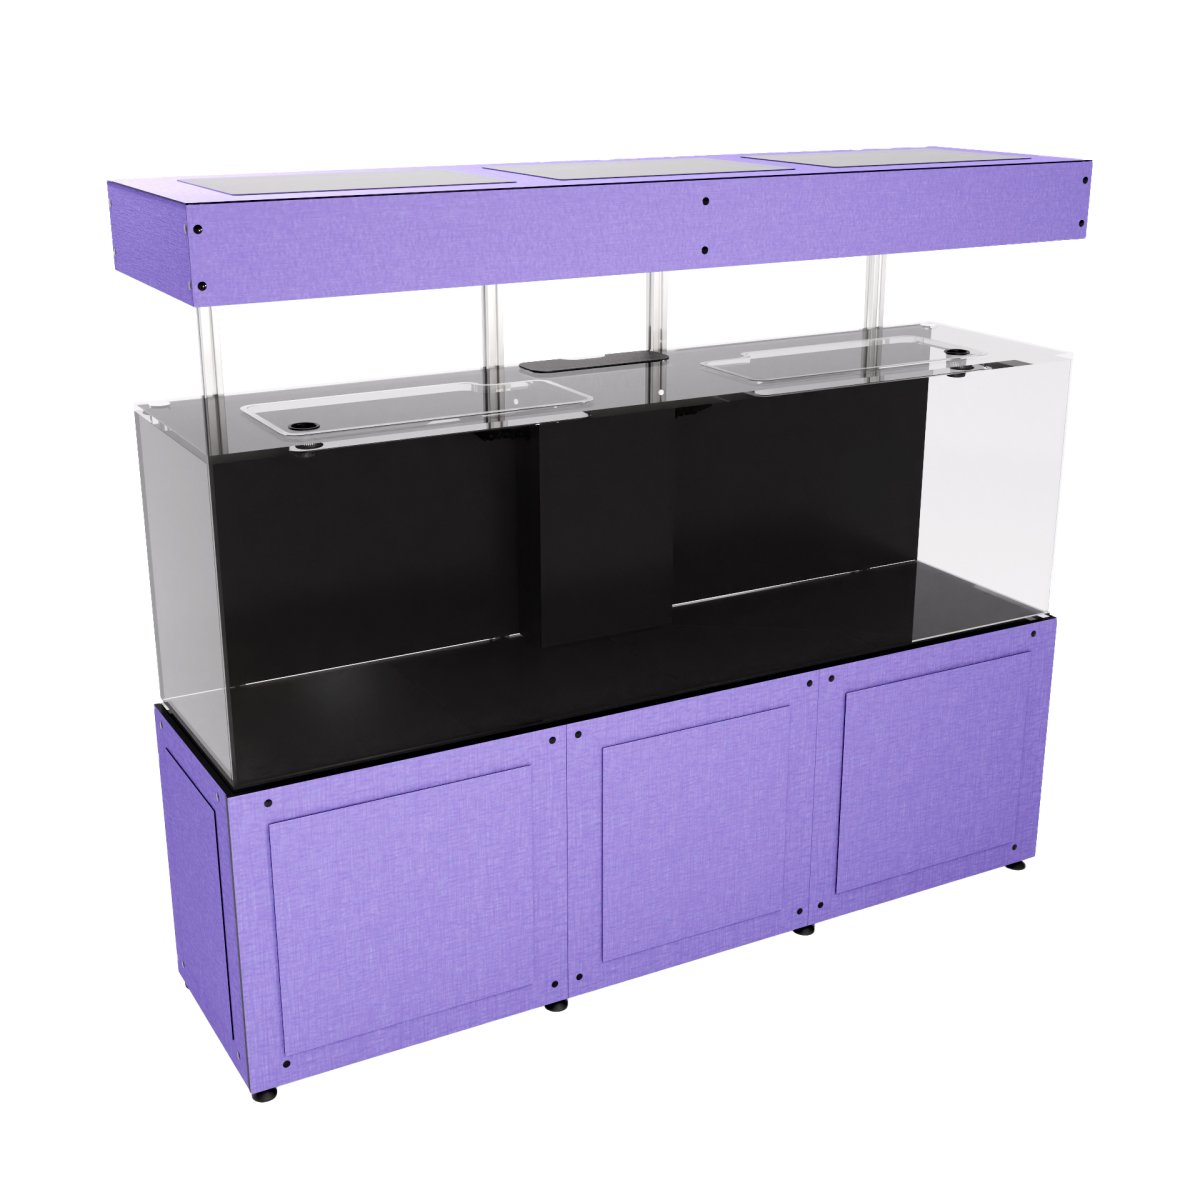 96x24x30 Cabinet Stand w Canopy - hanging doors - Gumball.jpg